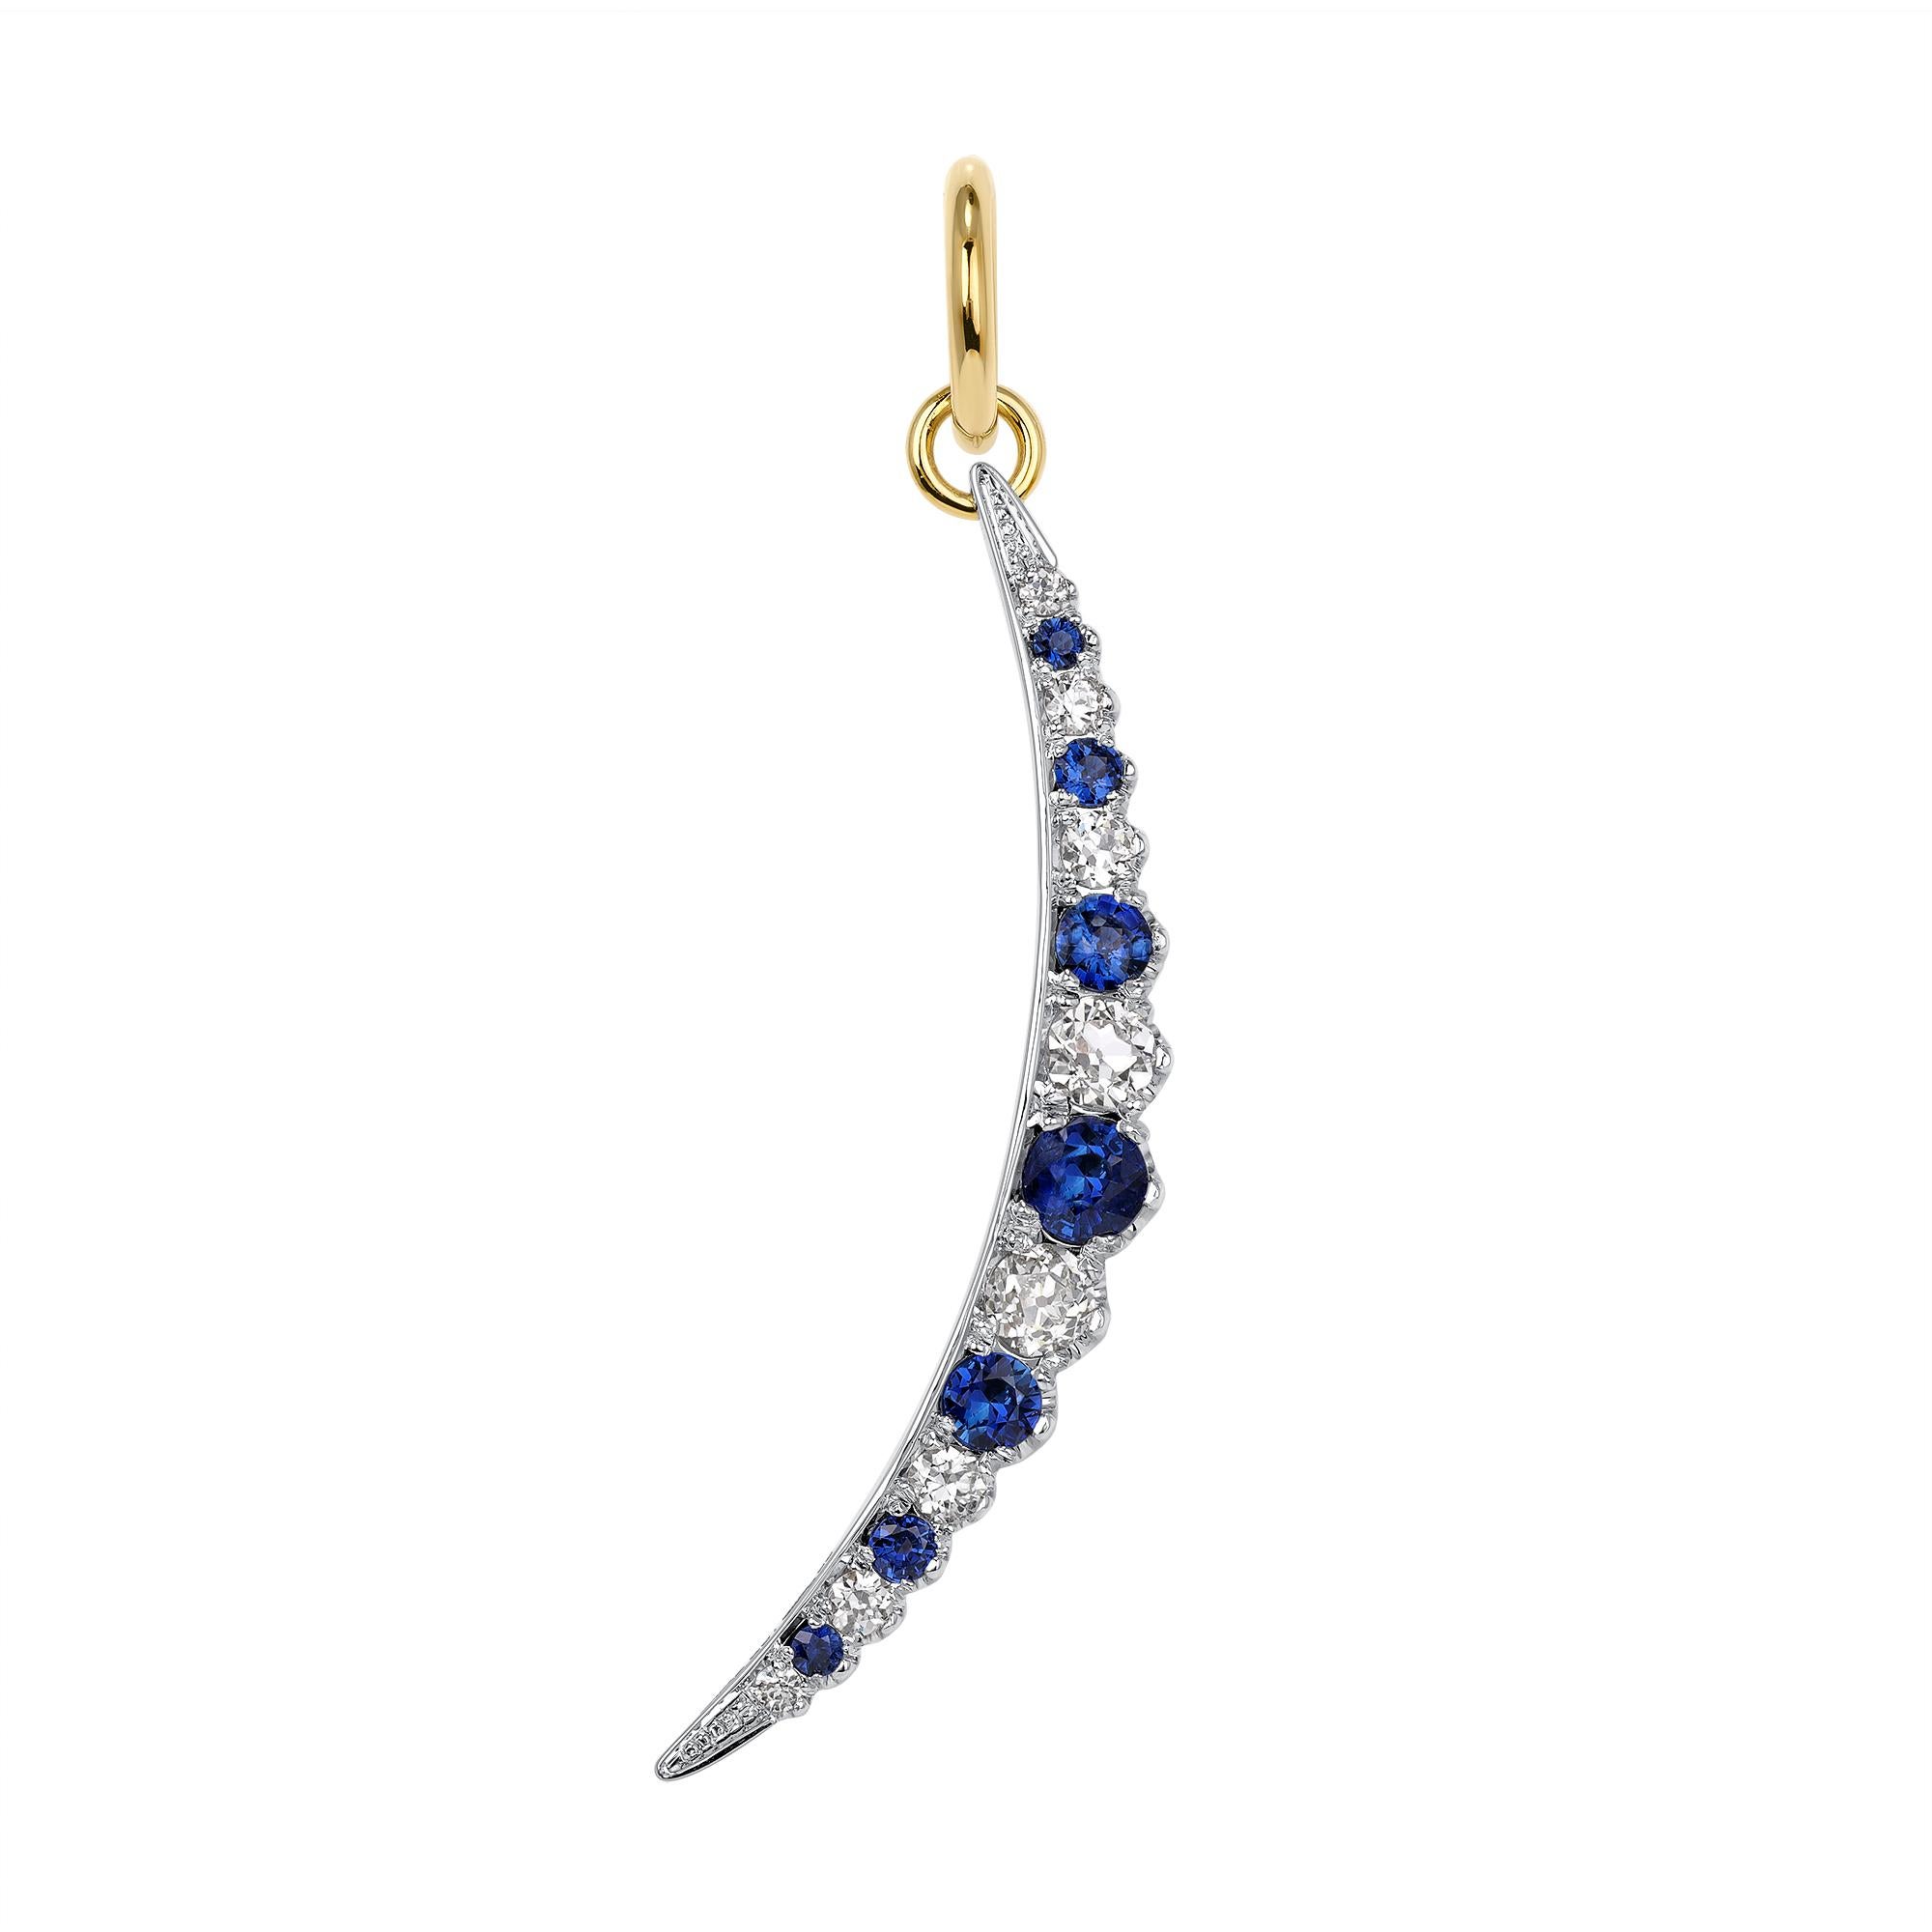 Approximately 0.95ctw G-H/VS-SI old European cut diamonds alongside approximately 1.15ctw round cut color gemstones prong set in a handcrafted 18K yellow gold and platinum crescent moon charm. 

Available with alternating blue sapphires or rubies. 